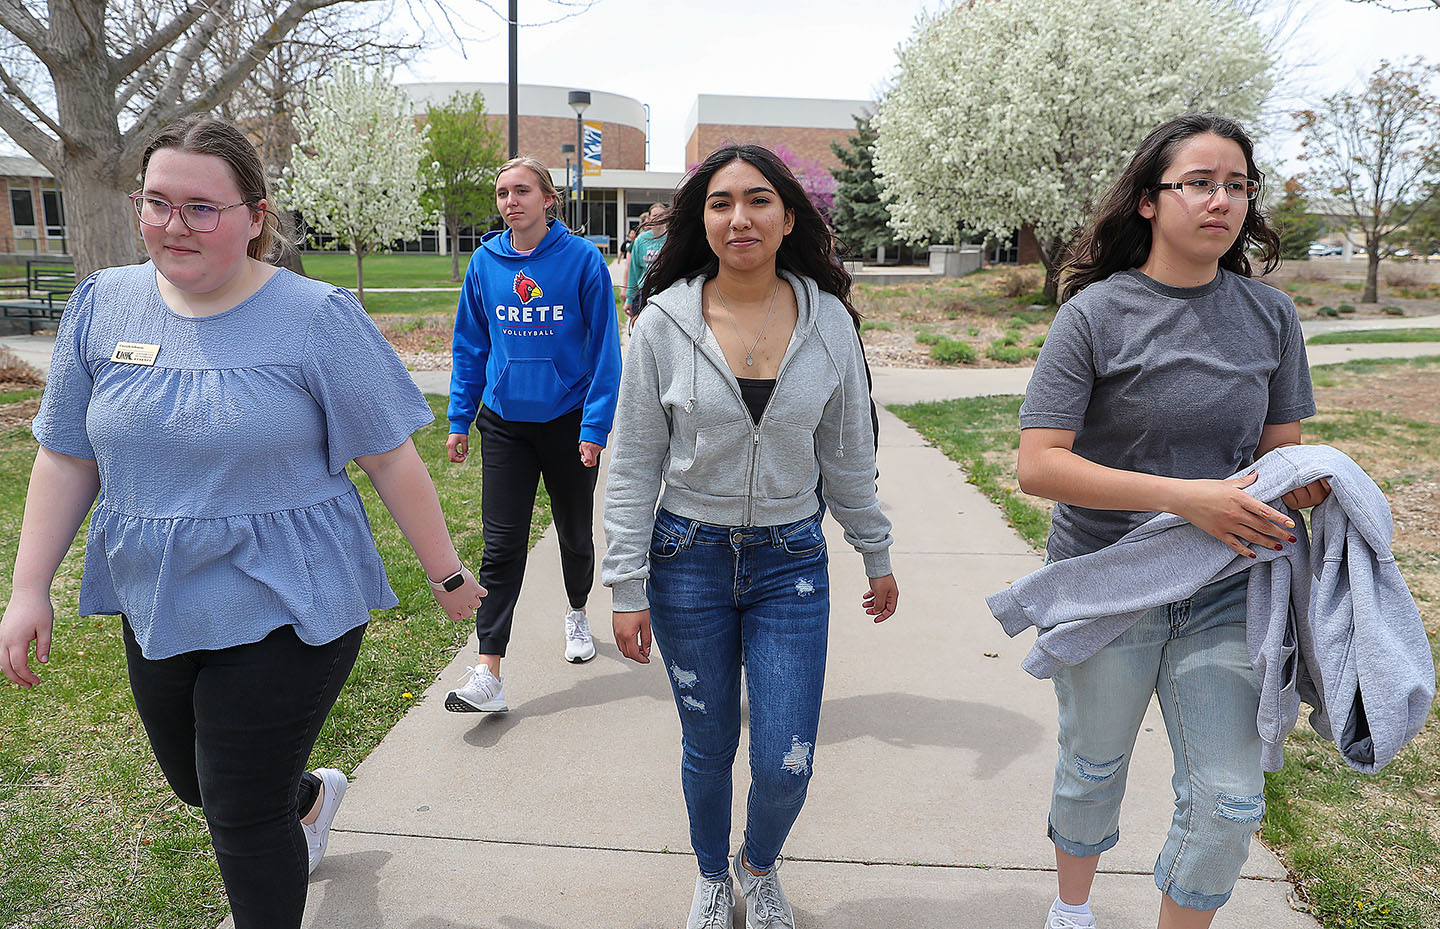 Crete High School students tour campus during last week’s visit to UNK.